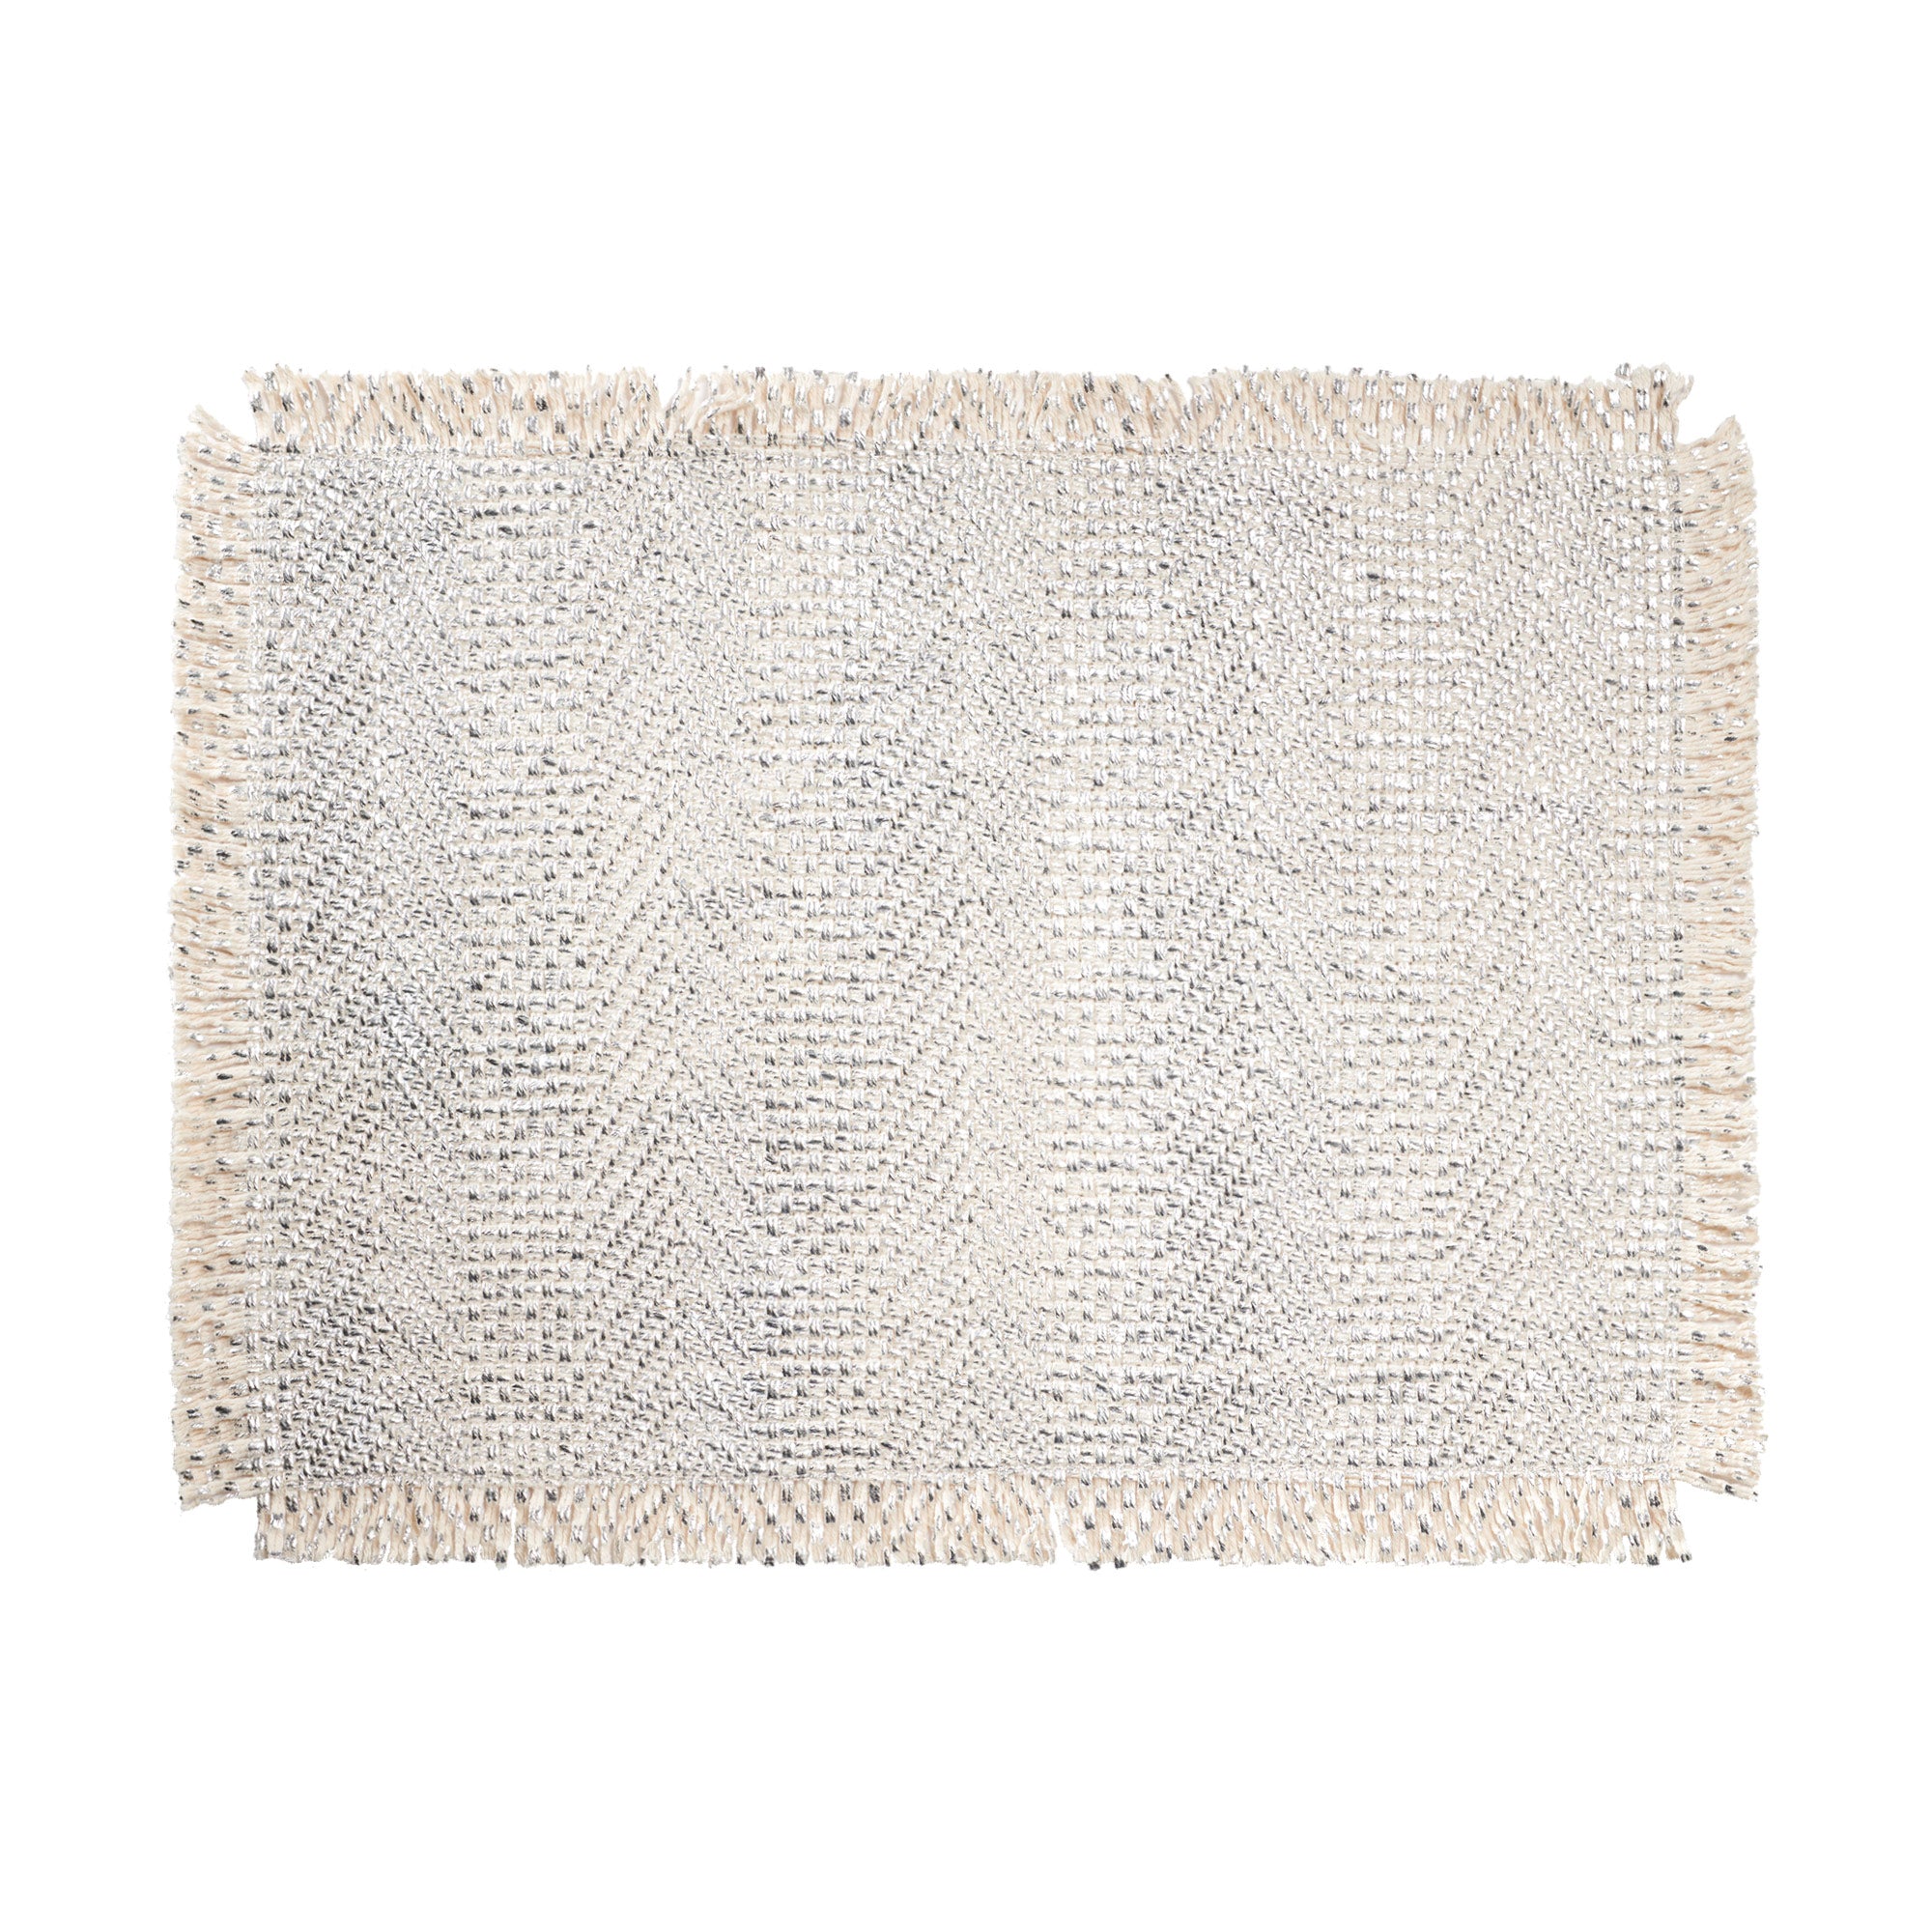 fringed-silver-placemat